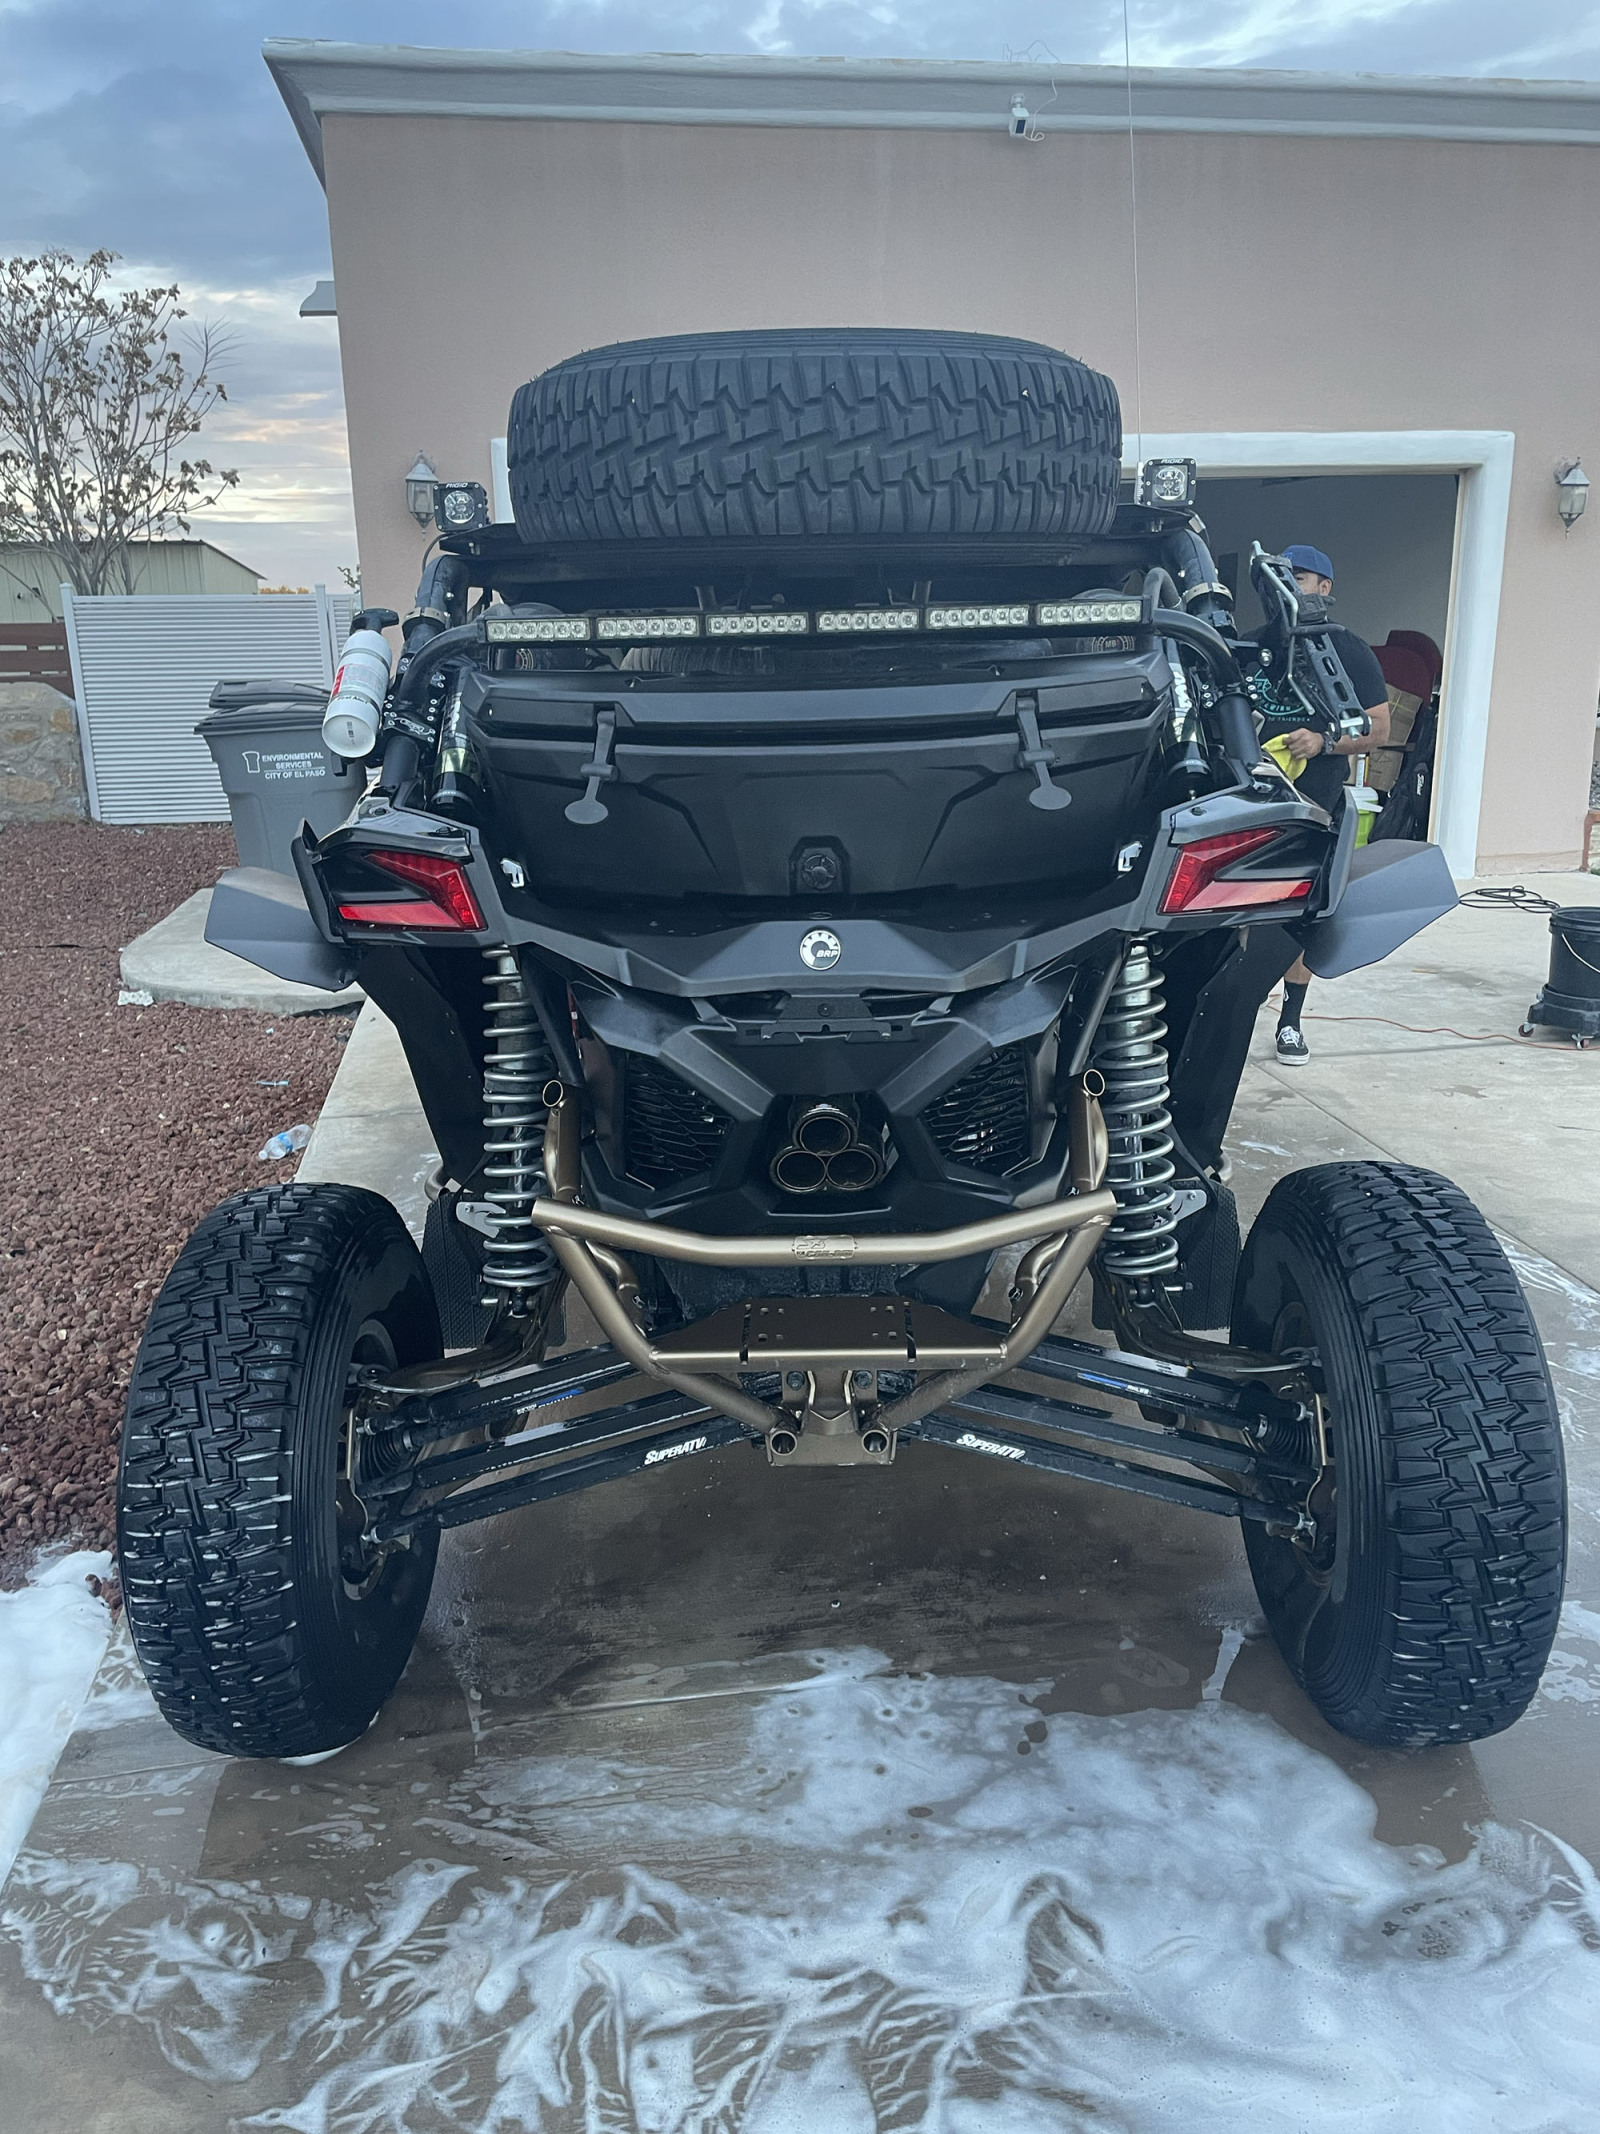 For Sale: 2019 can am maverick x3 turbo R with over 40k in upgrades - photo8